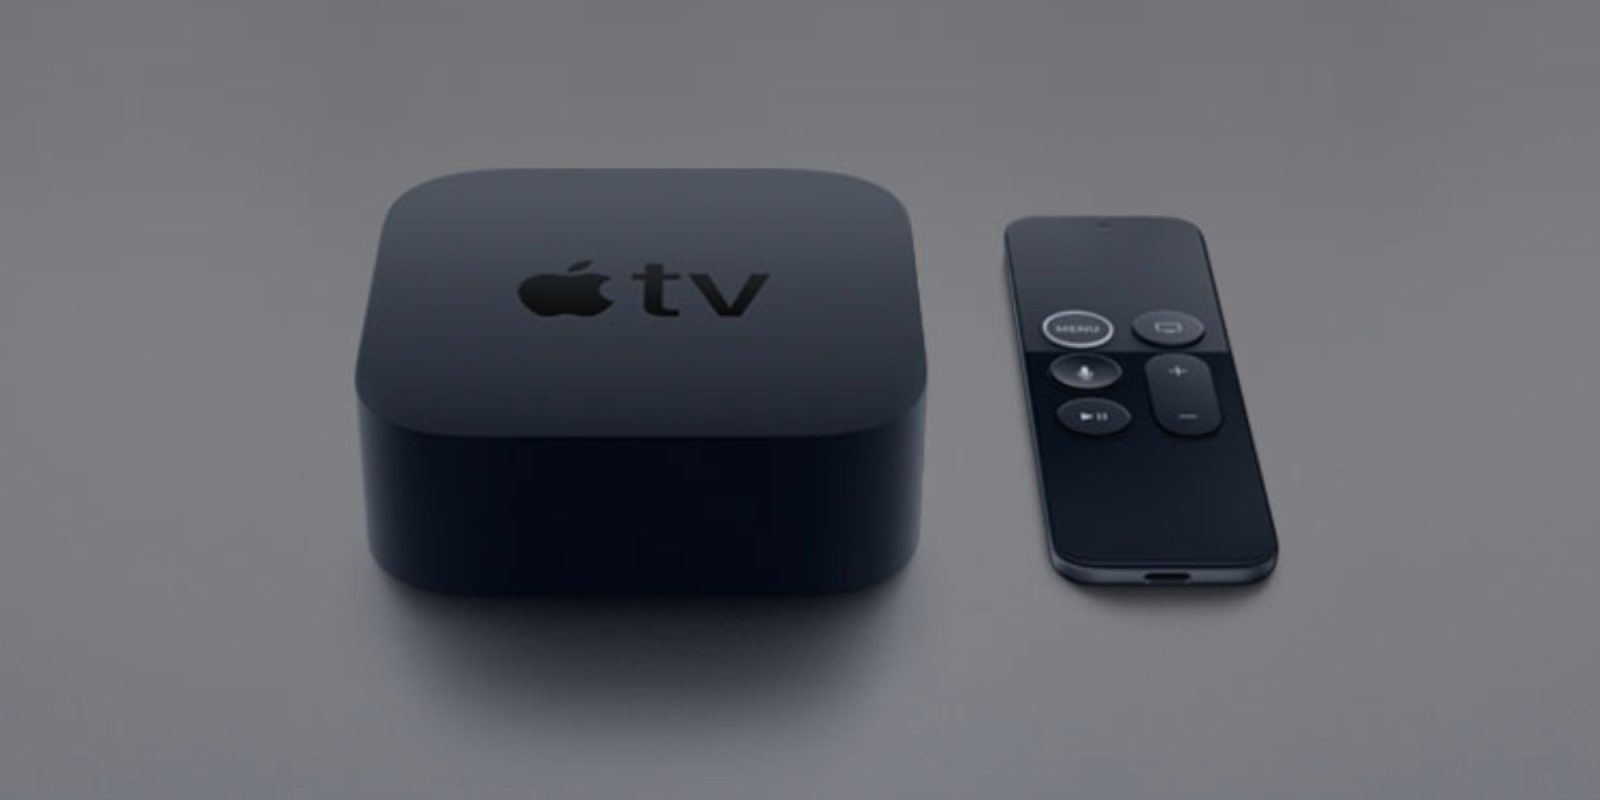 Bloomberg: New Apple TV in the with 'upgraded' remote, Find TV remote feature - 9to5Mac